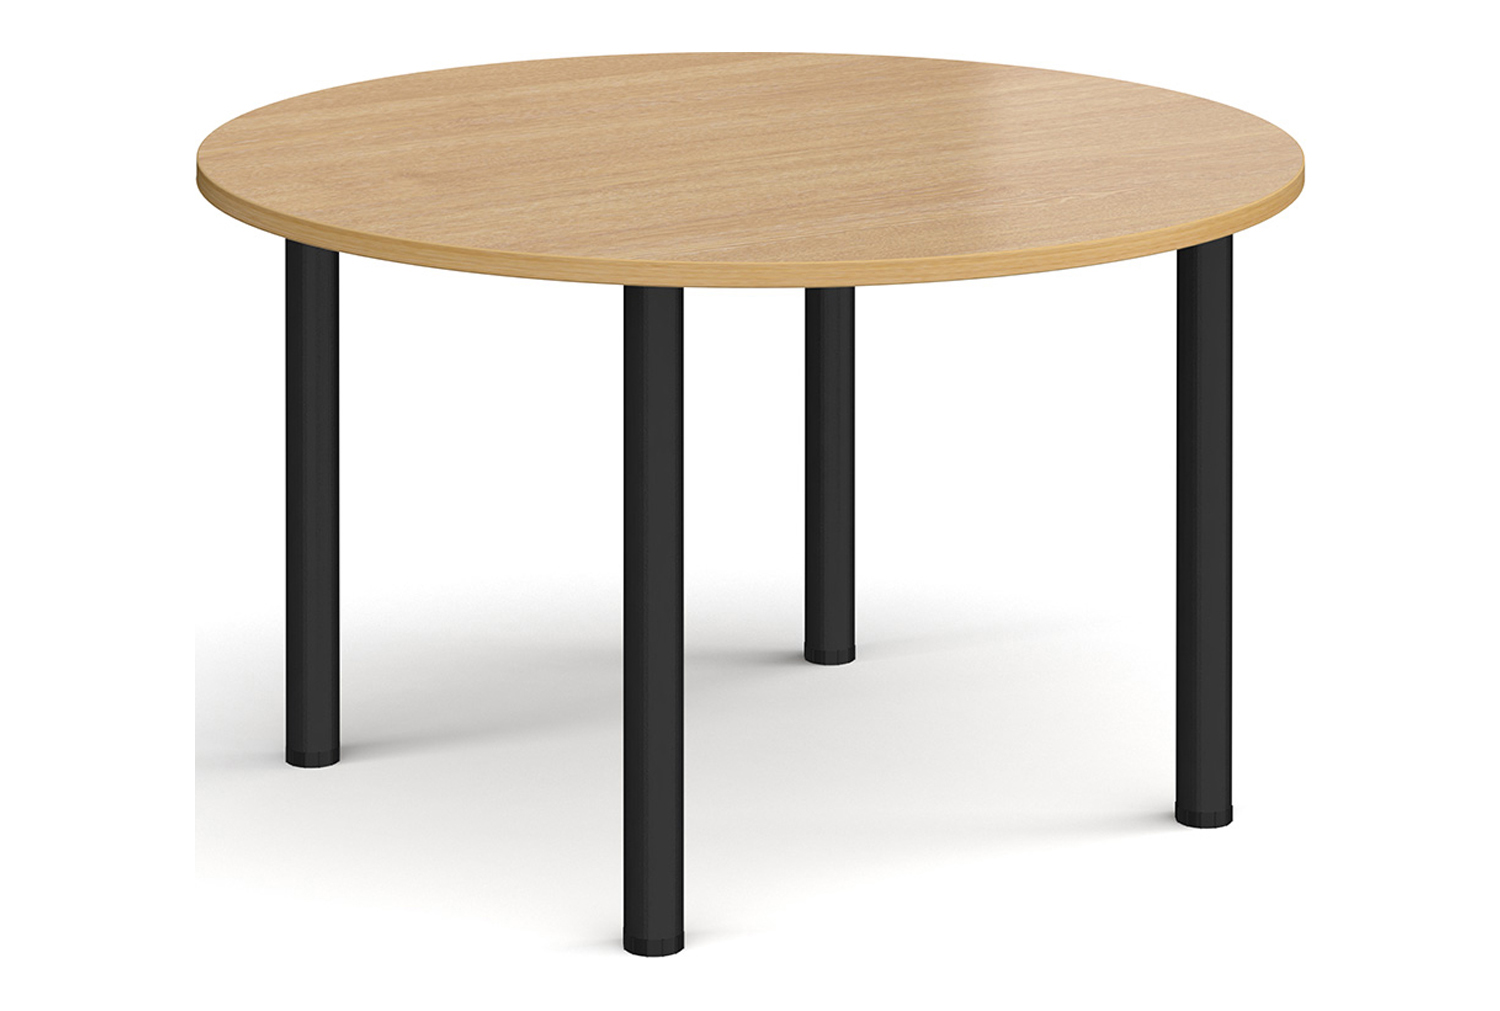 Rosetti Round Meeting Table, 120diax73h (cm), Oak, Fully Installed